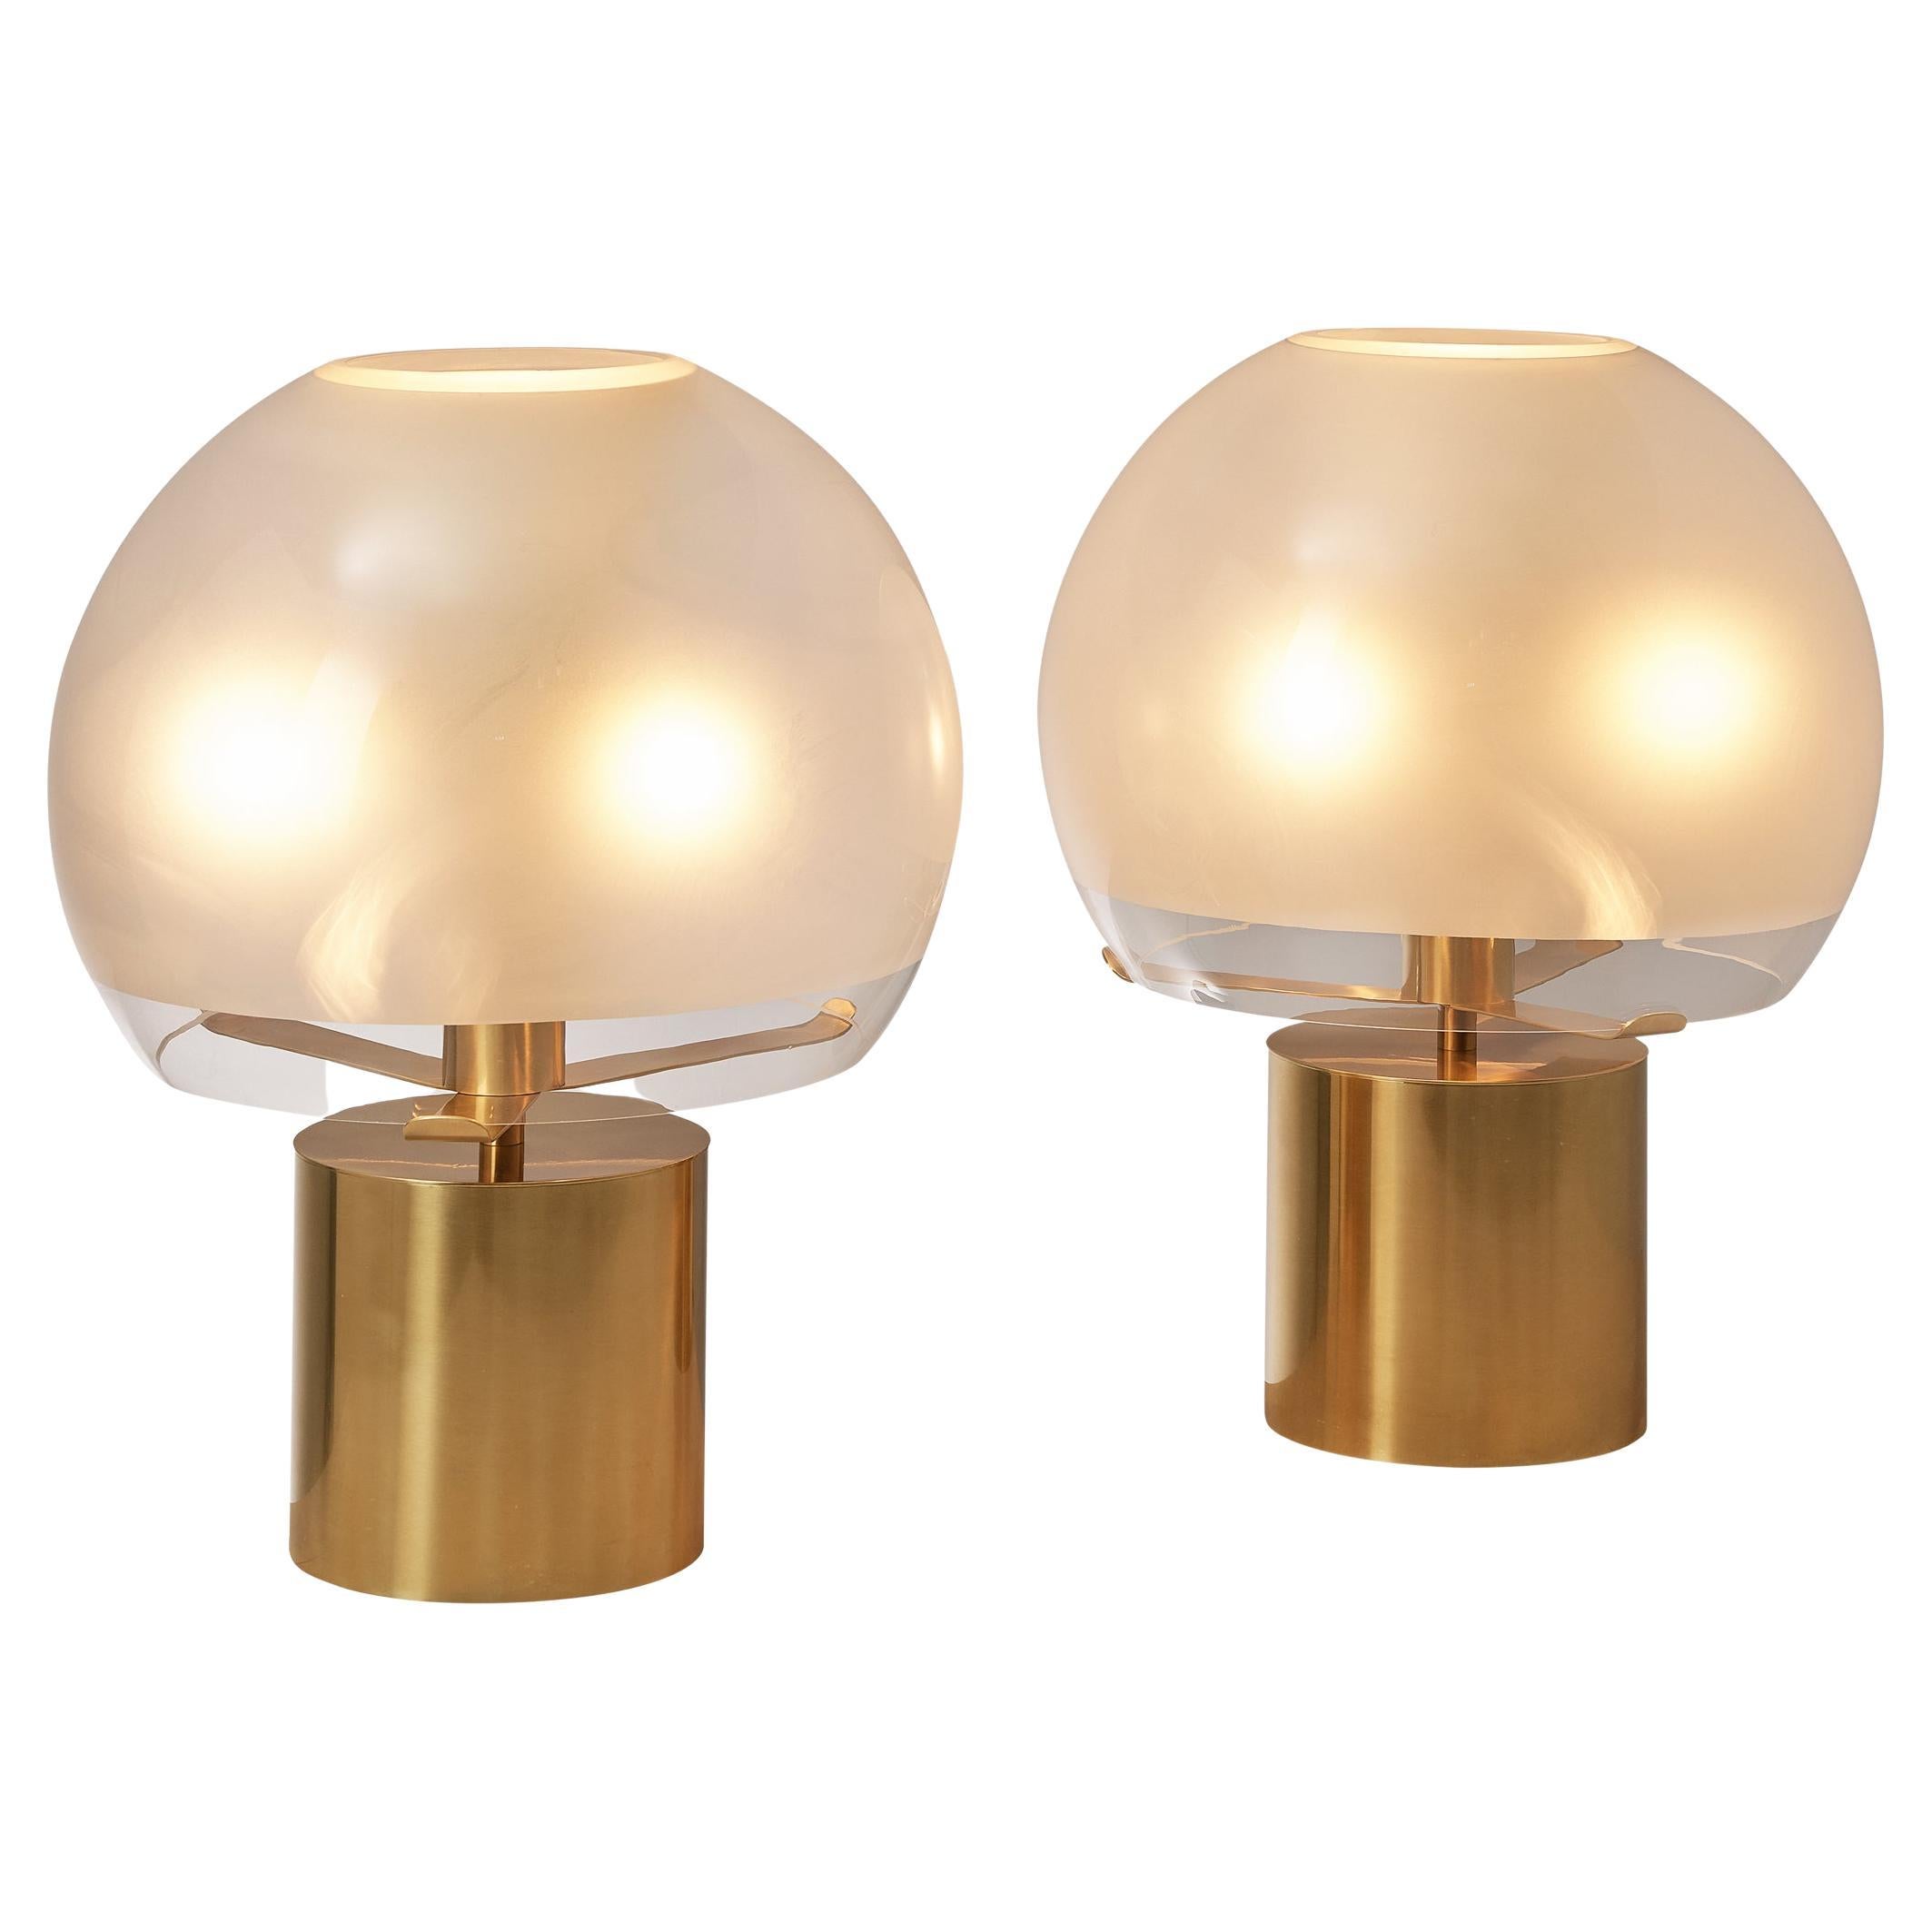 Luigi Caccia Dominioni for Azucena Table Lamps in Brass and Frosted Glass